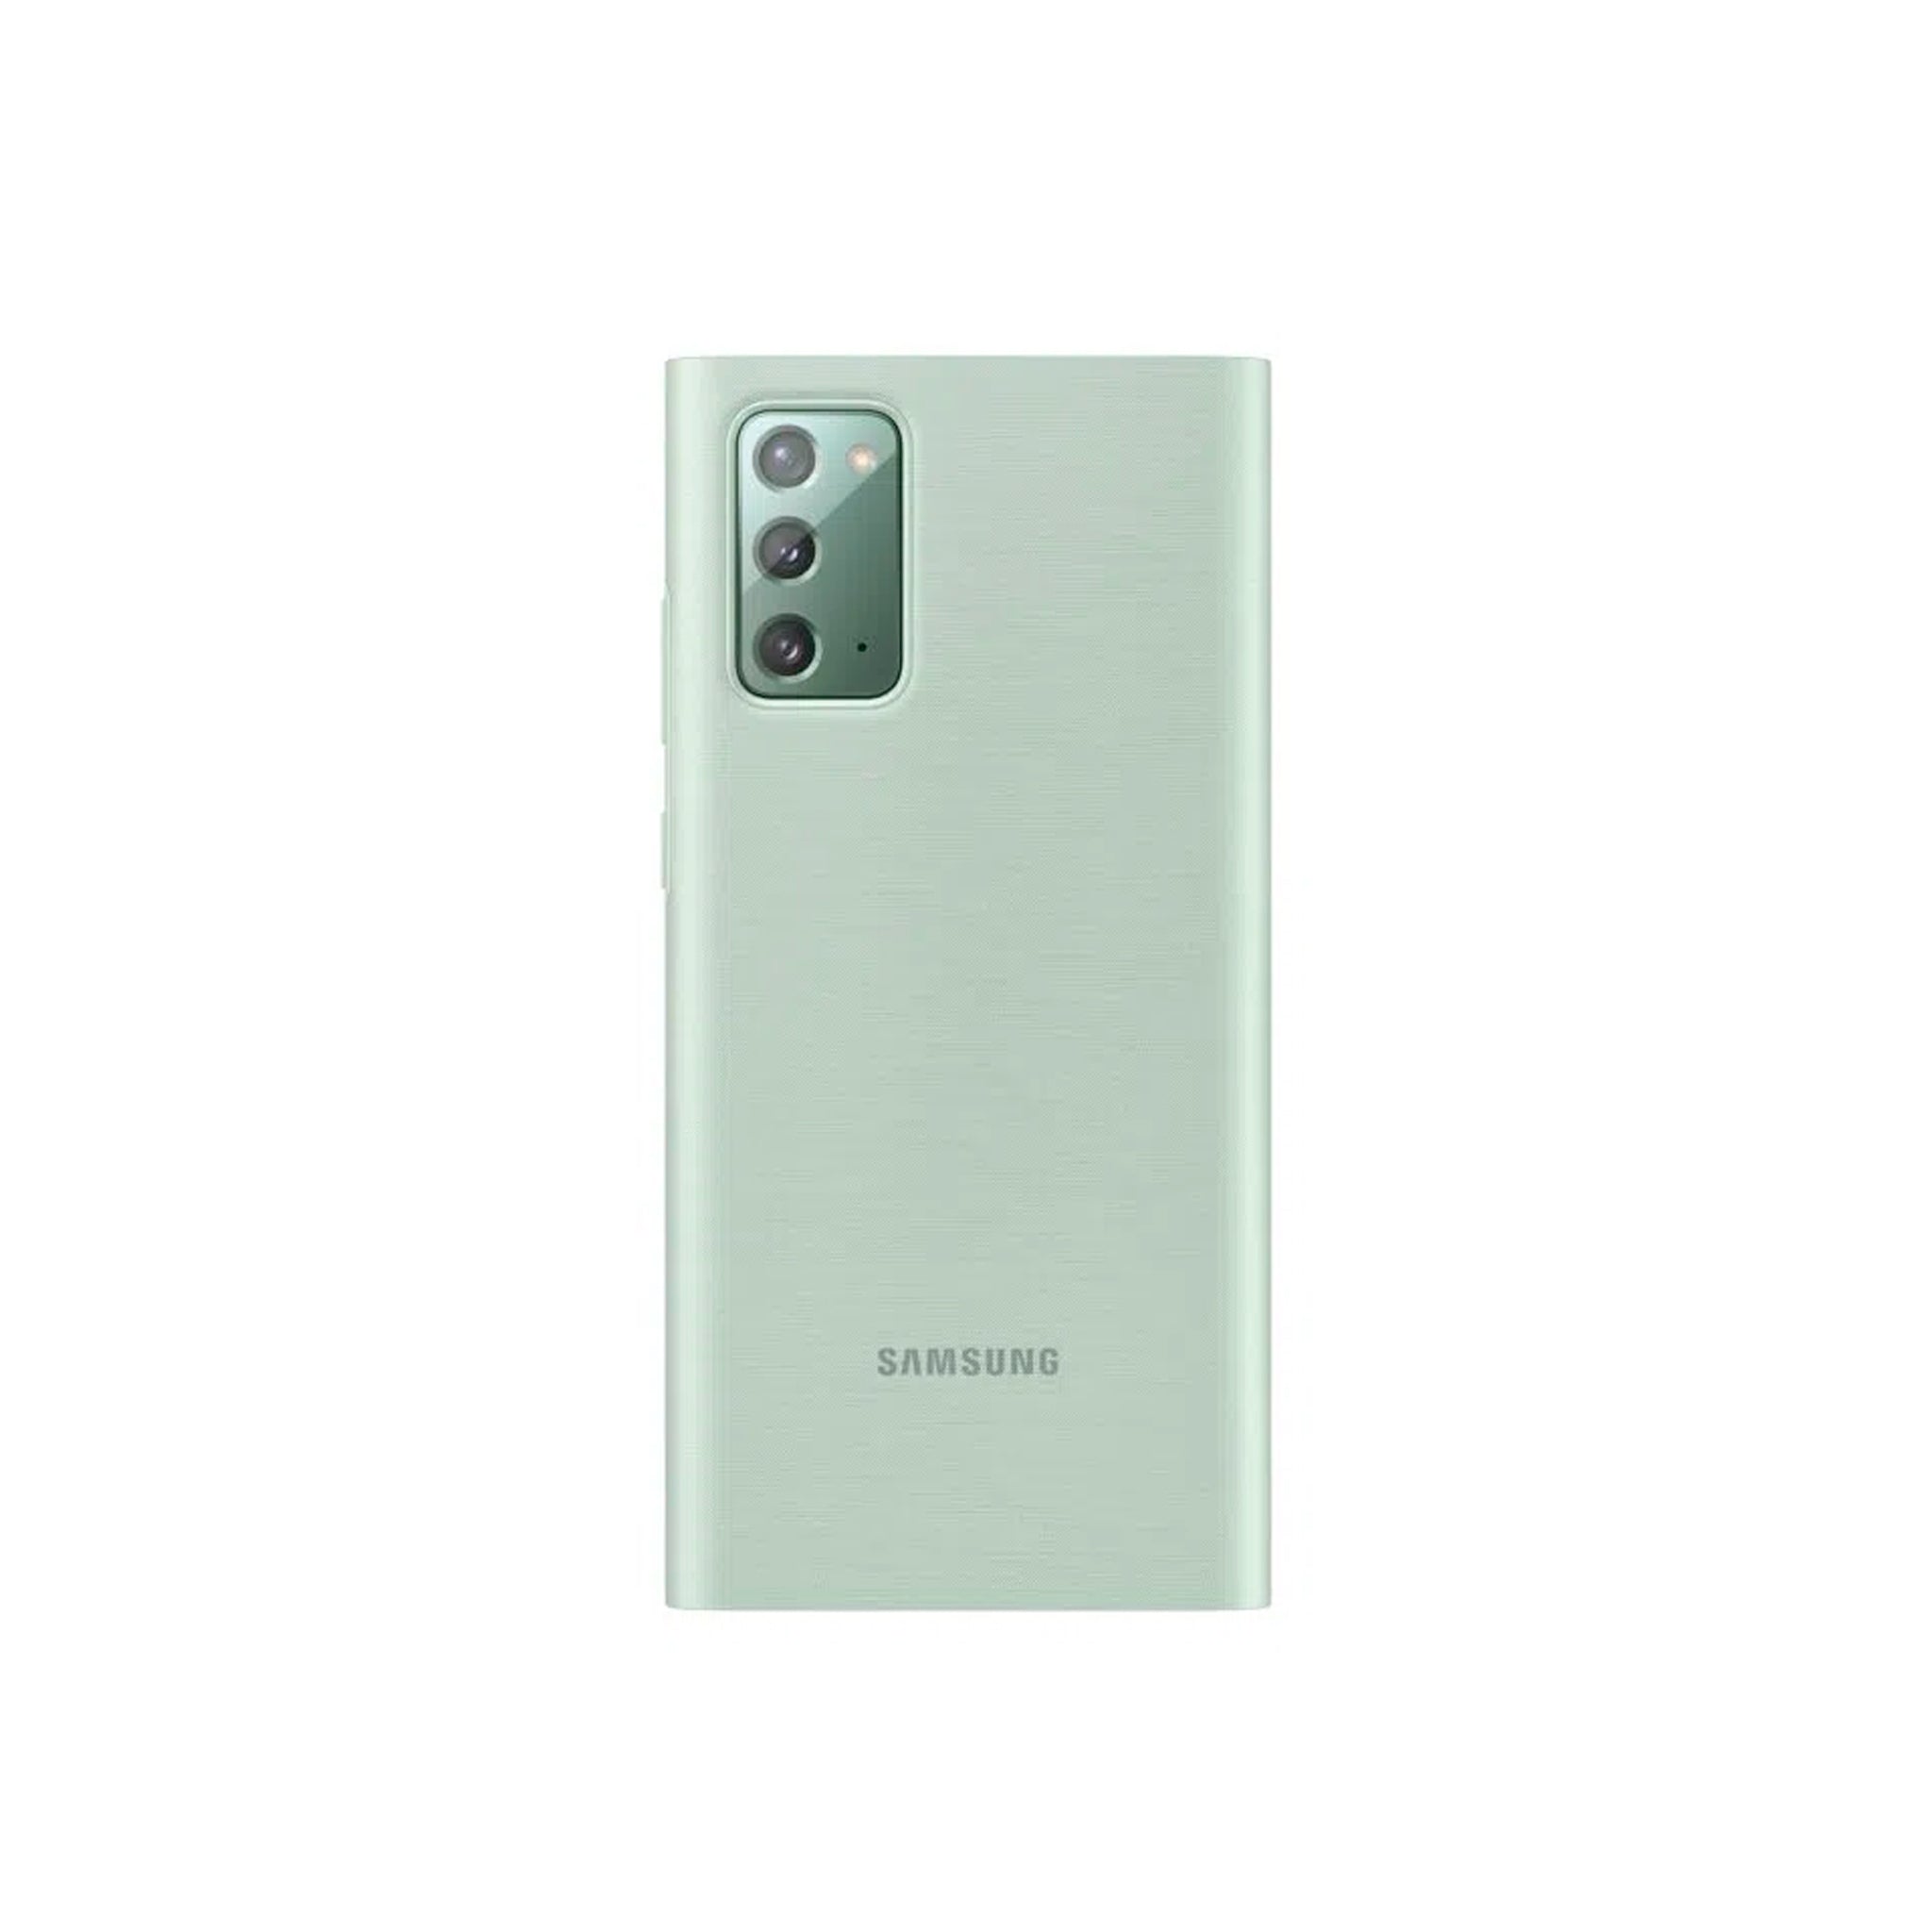 Samsung - Galaxy Note 20 (N980) LED View Cover - Green Mint